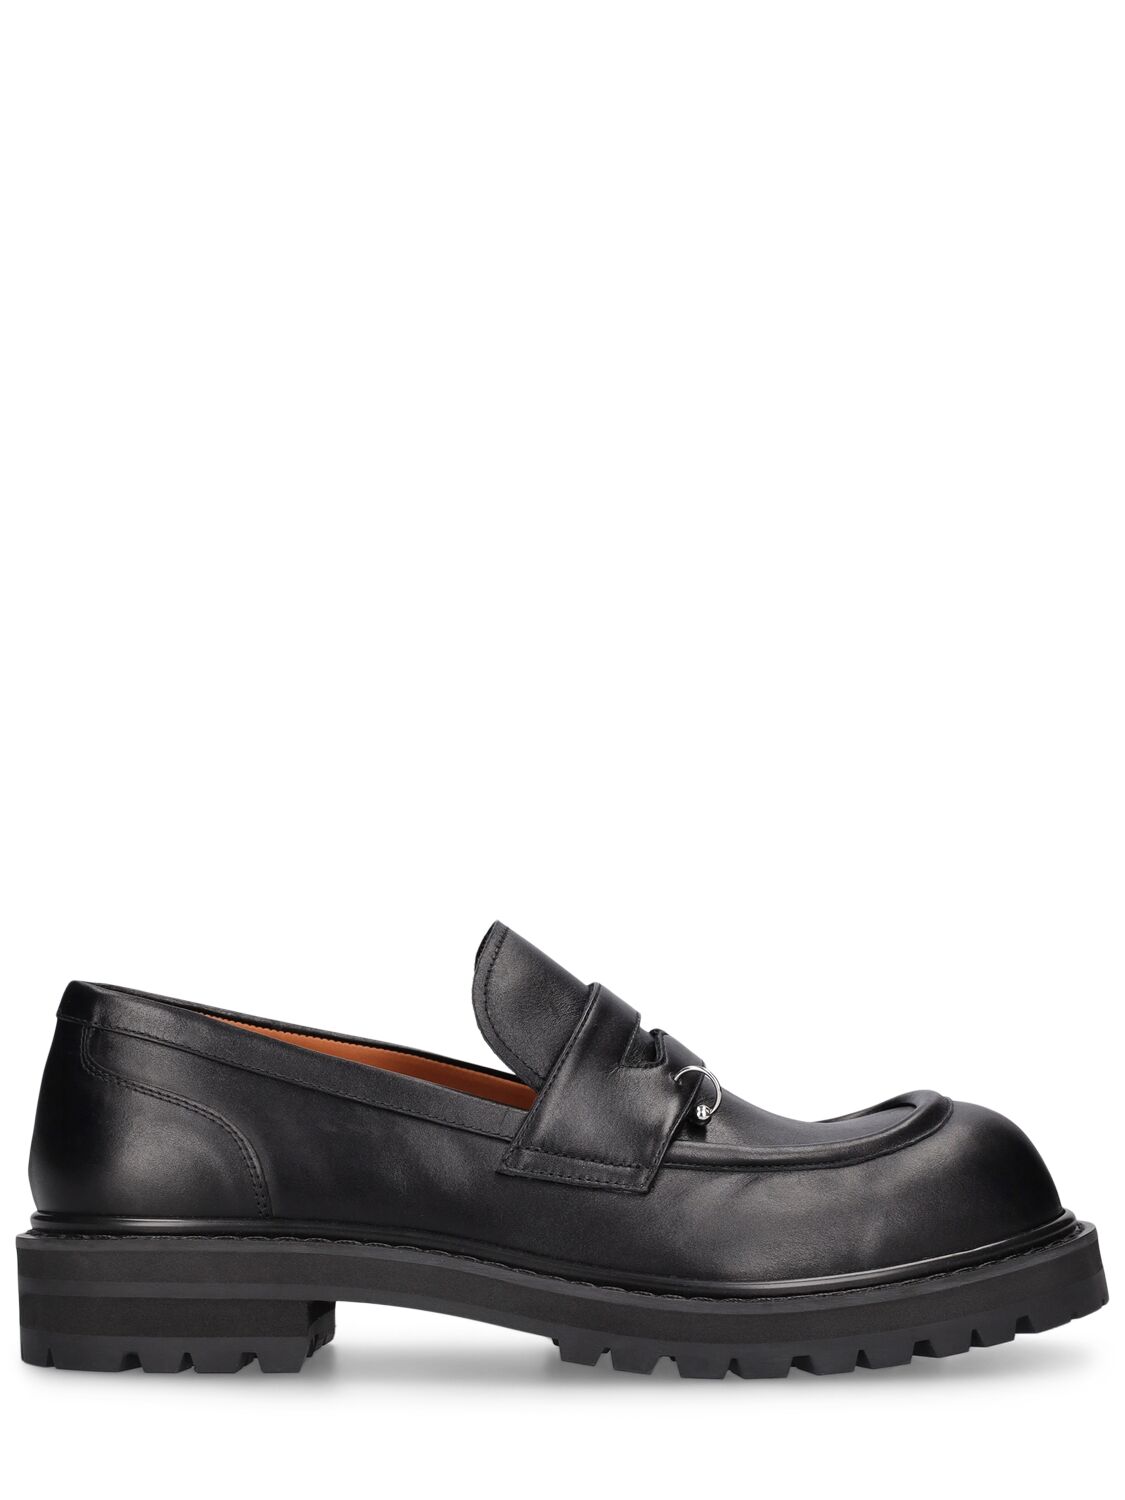 Image of Leather Loafers